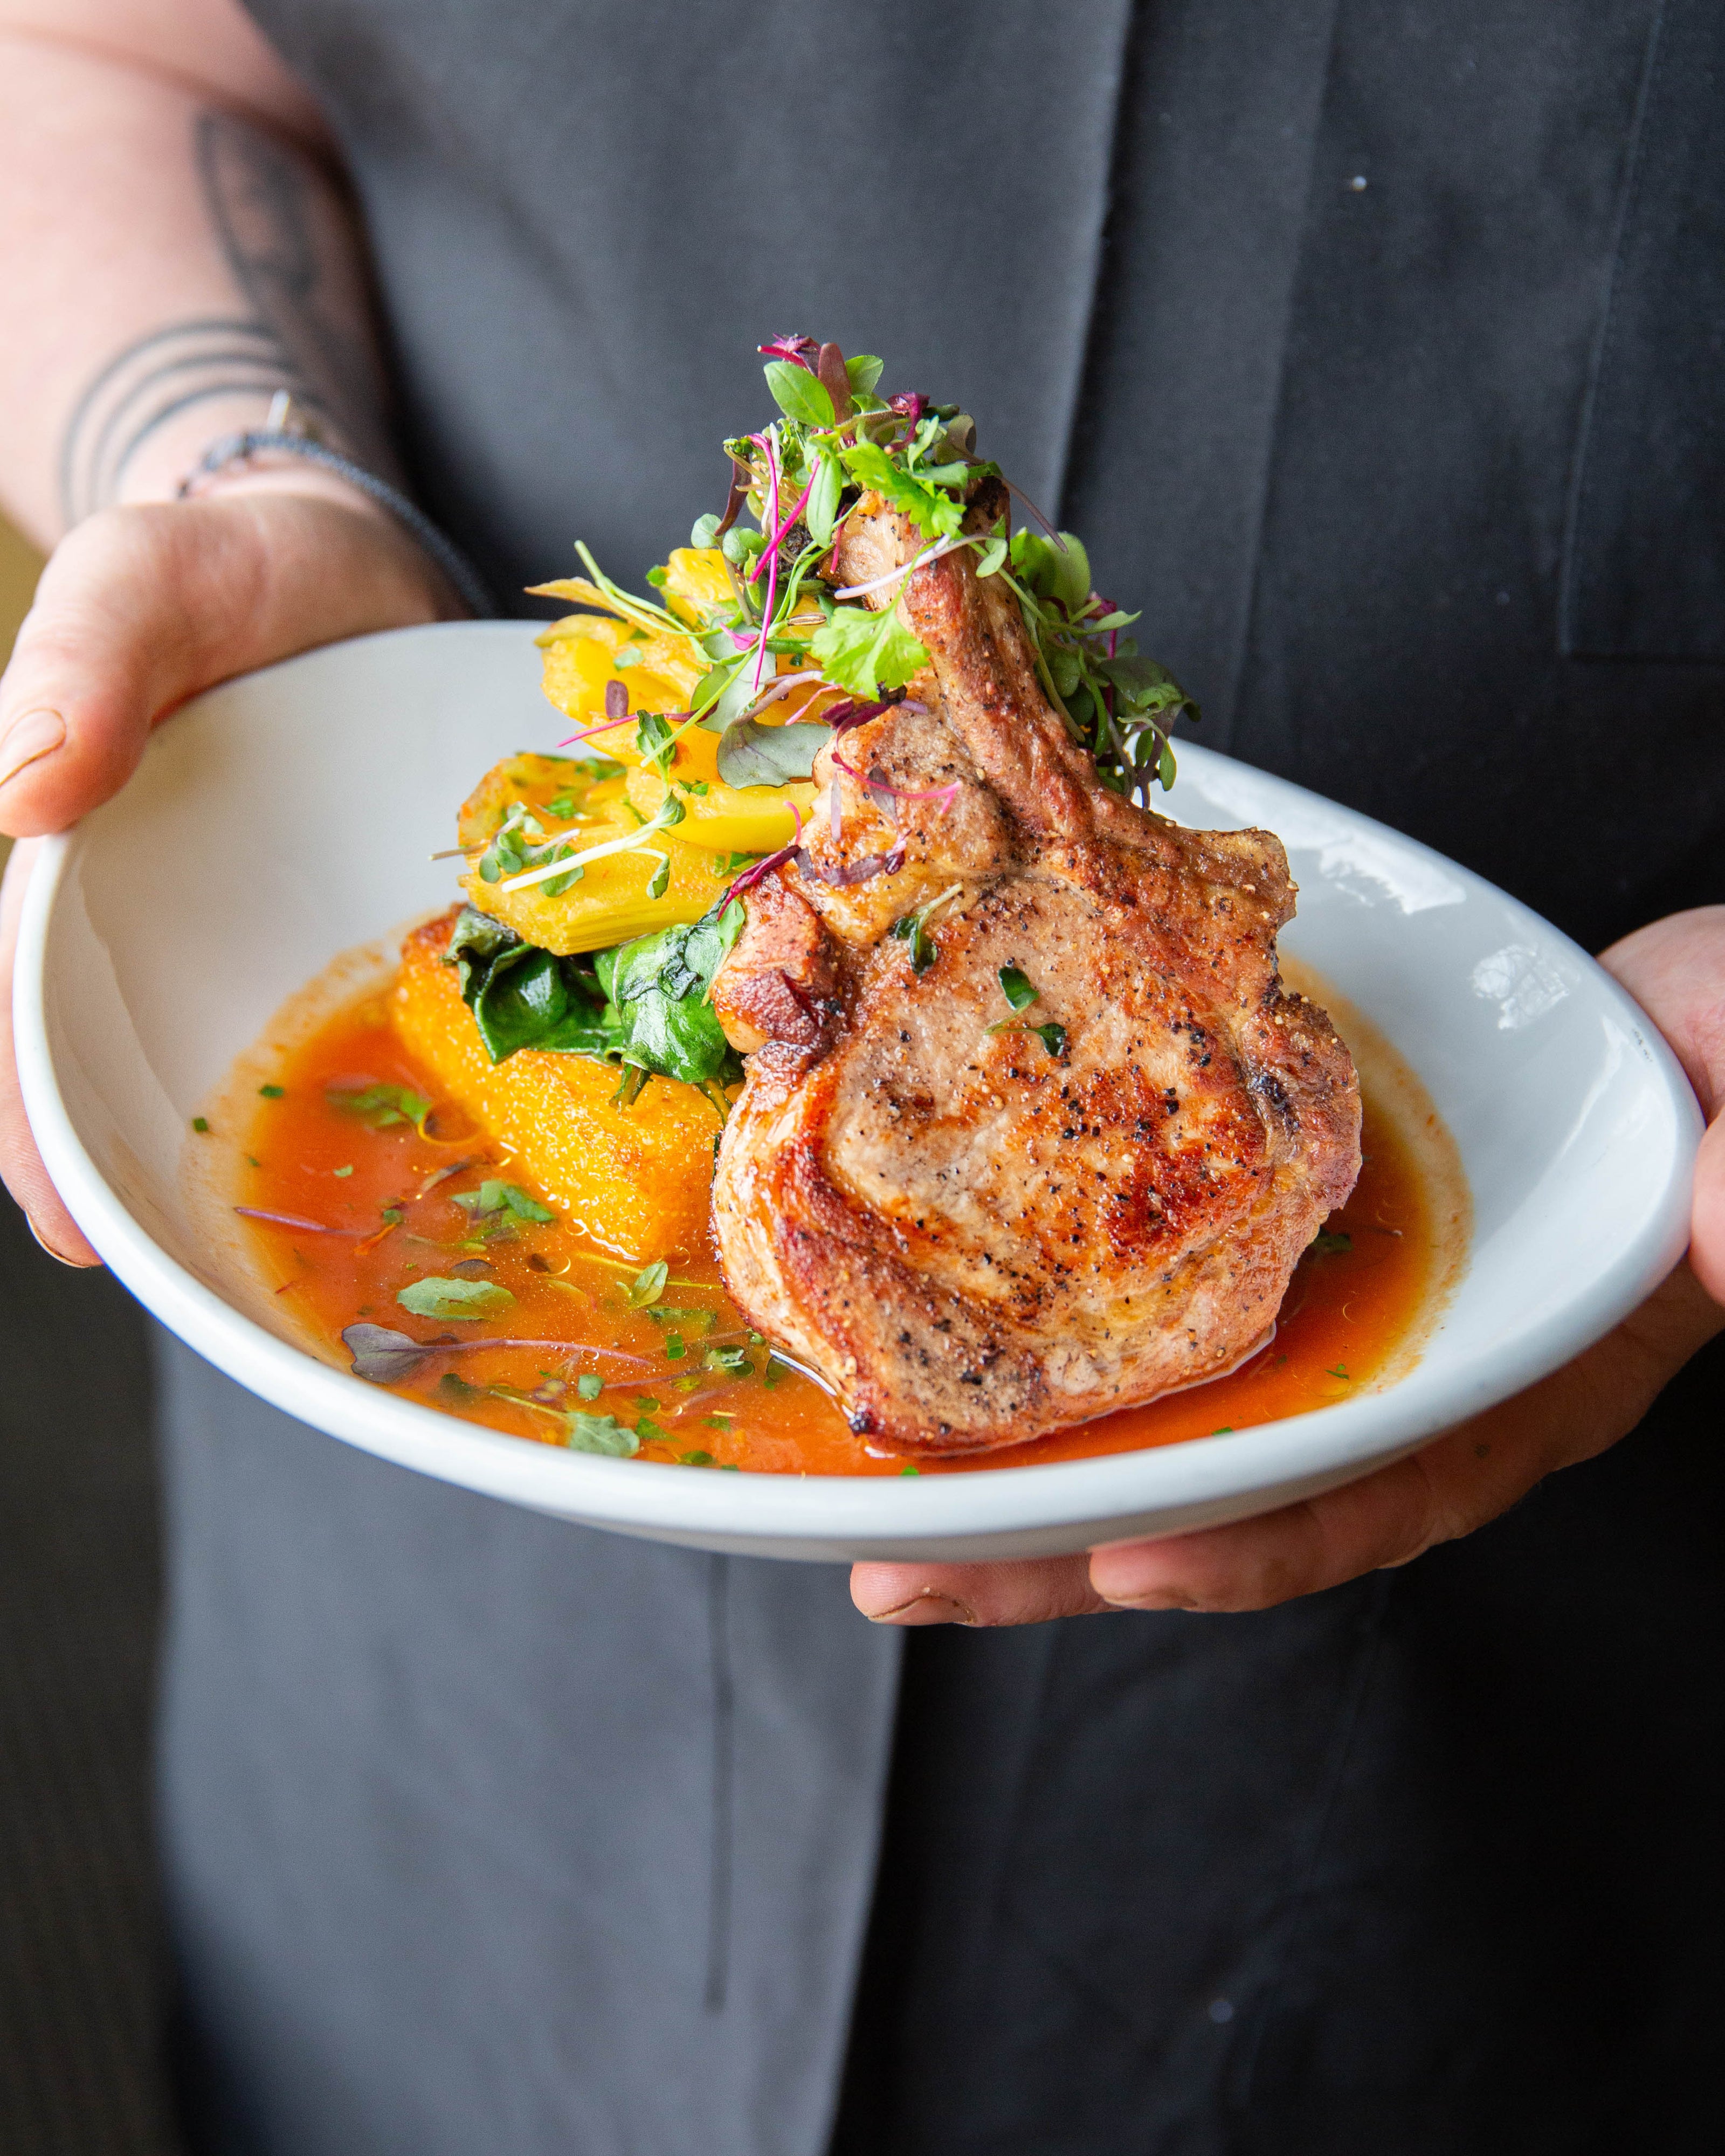 A pork dish on the dinner menu at Papa Haydn's Sellwood restaurant with a polenta cake, greens, and squash